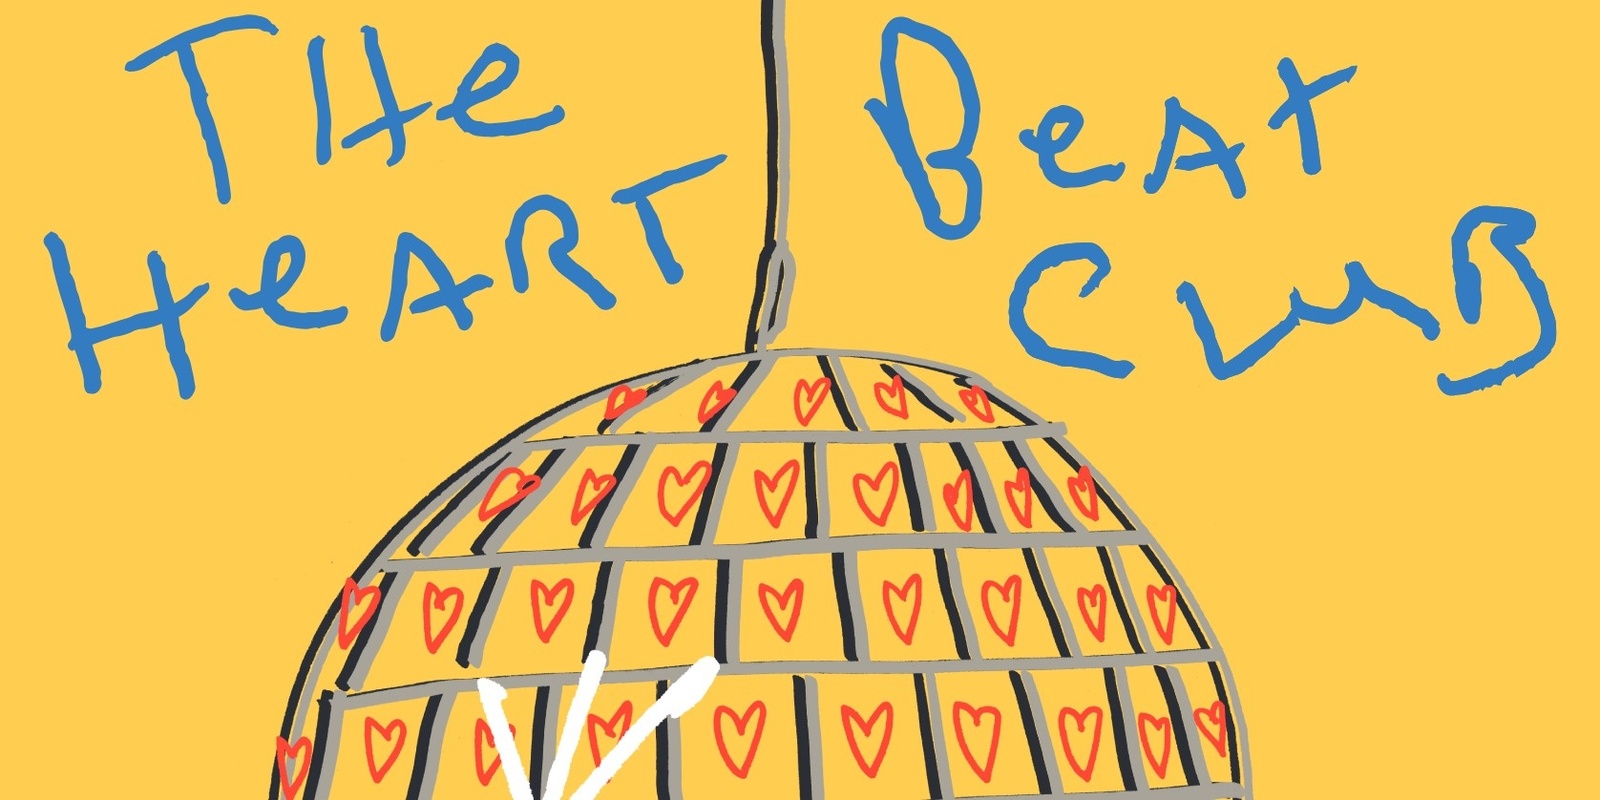 Banner image for The Heart Beat Club - Disability Club Night